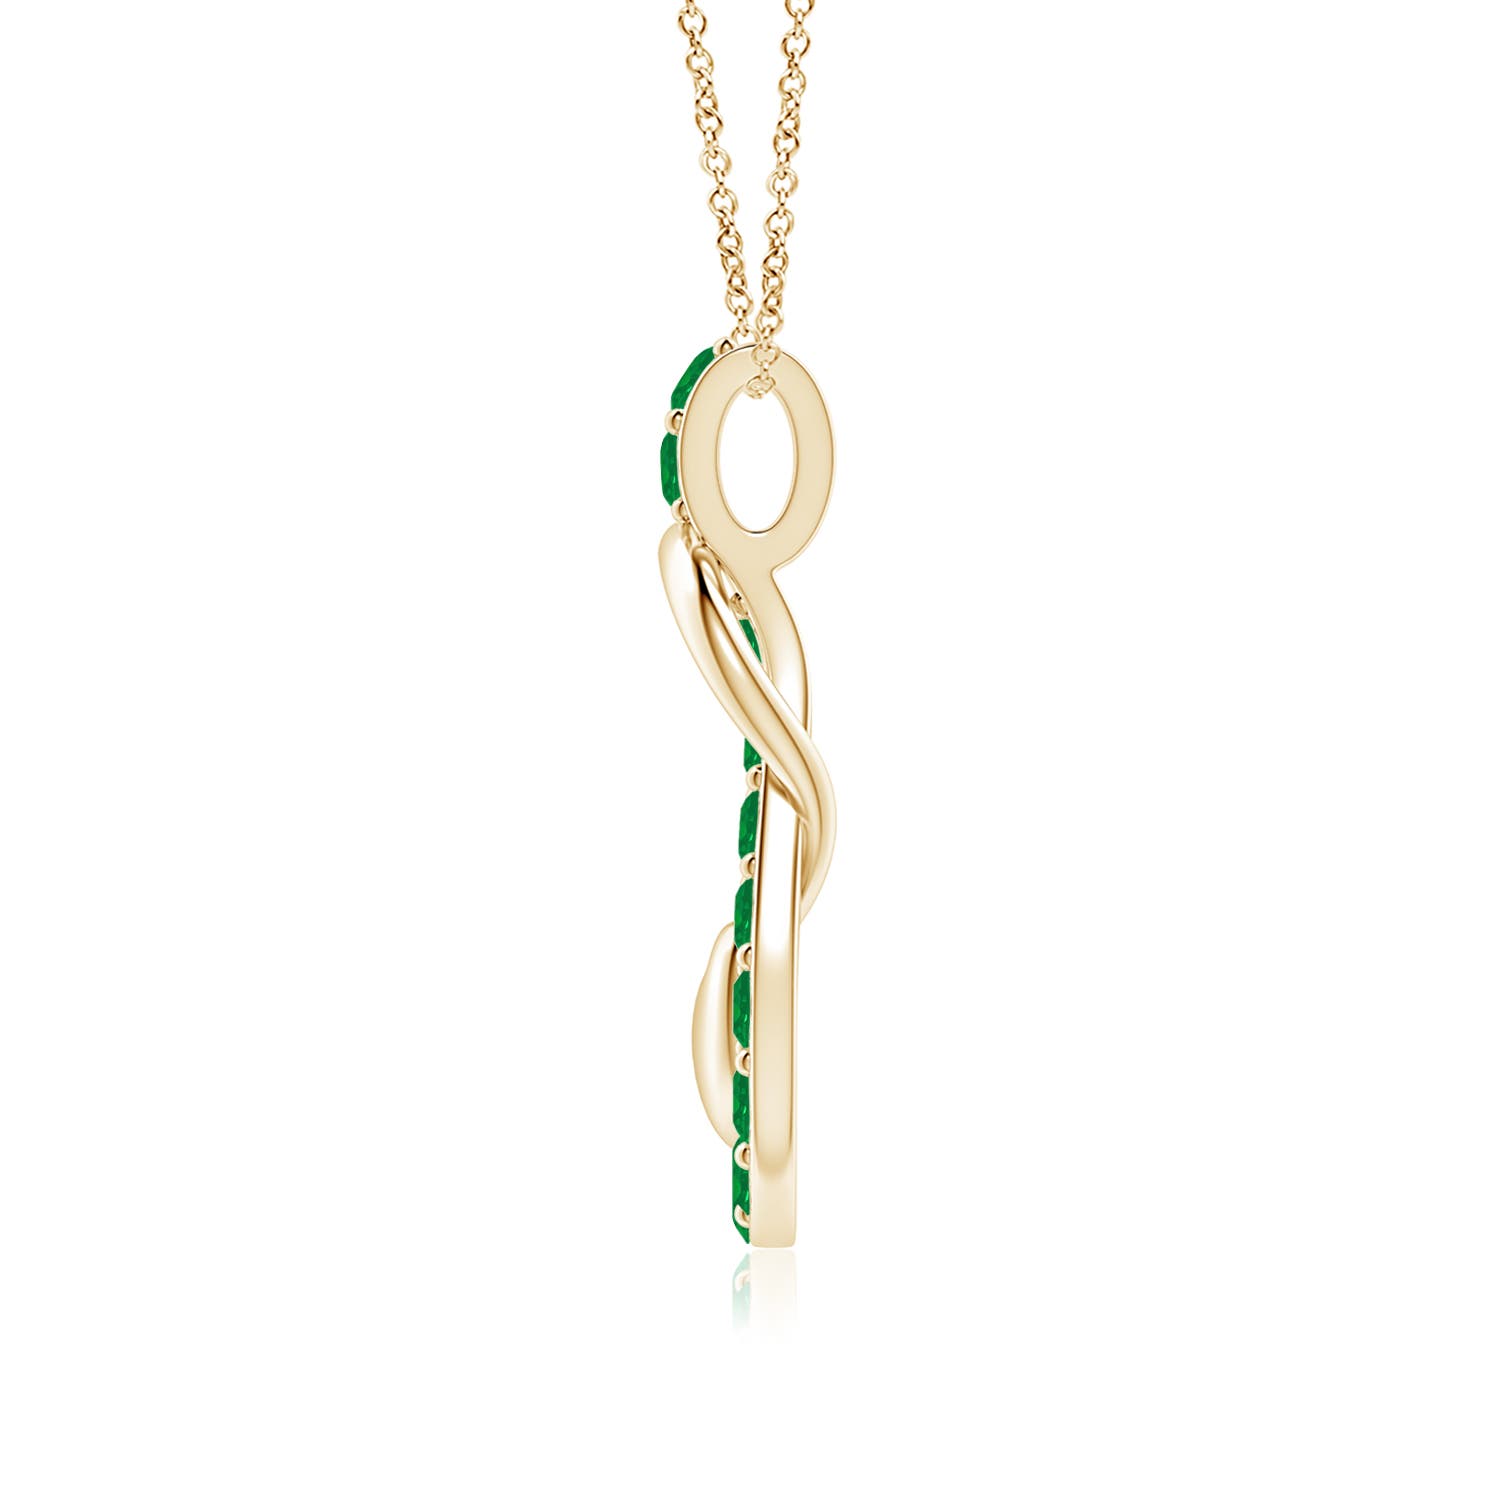 AA - Emerald / 1.9 CT / 18 KT Yellow Gold